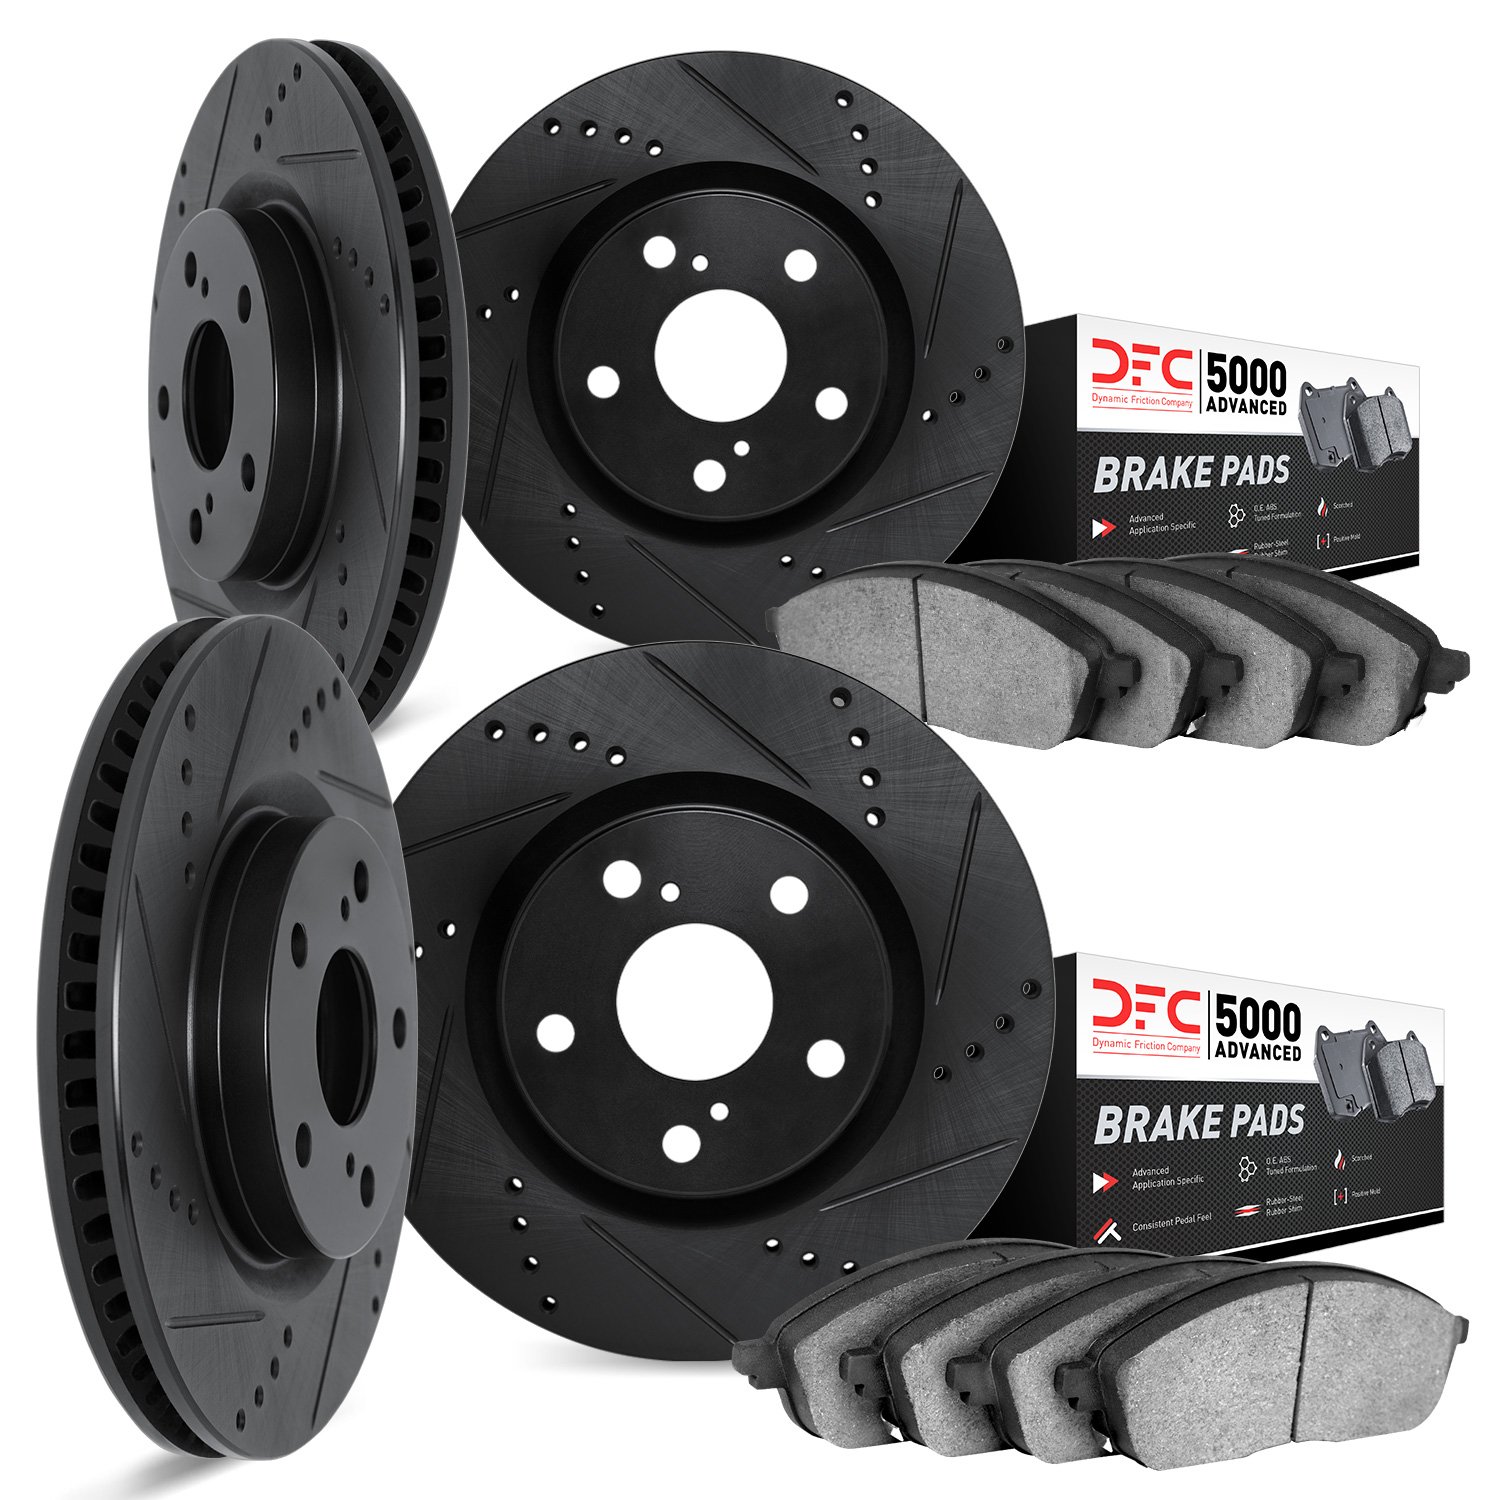 8504-47243 Drilled/Slotted Brake Rotors w/5000 Advanced Brake Pads Kit [Black], 1963-1982 GM, Position: Front and Rear